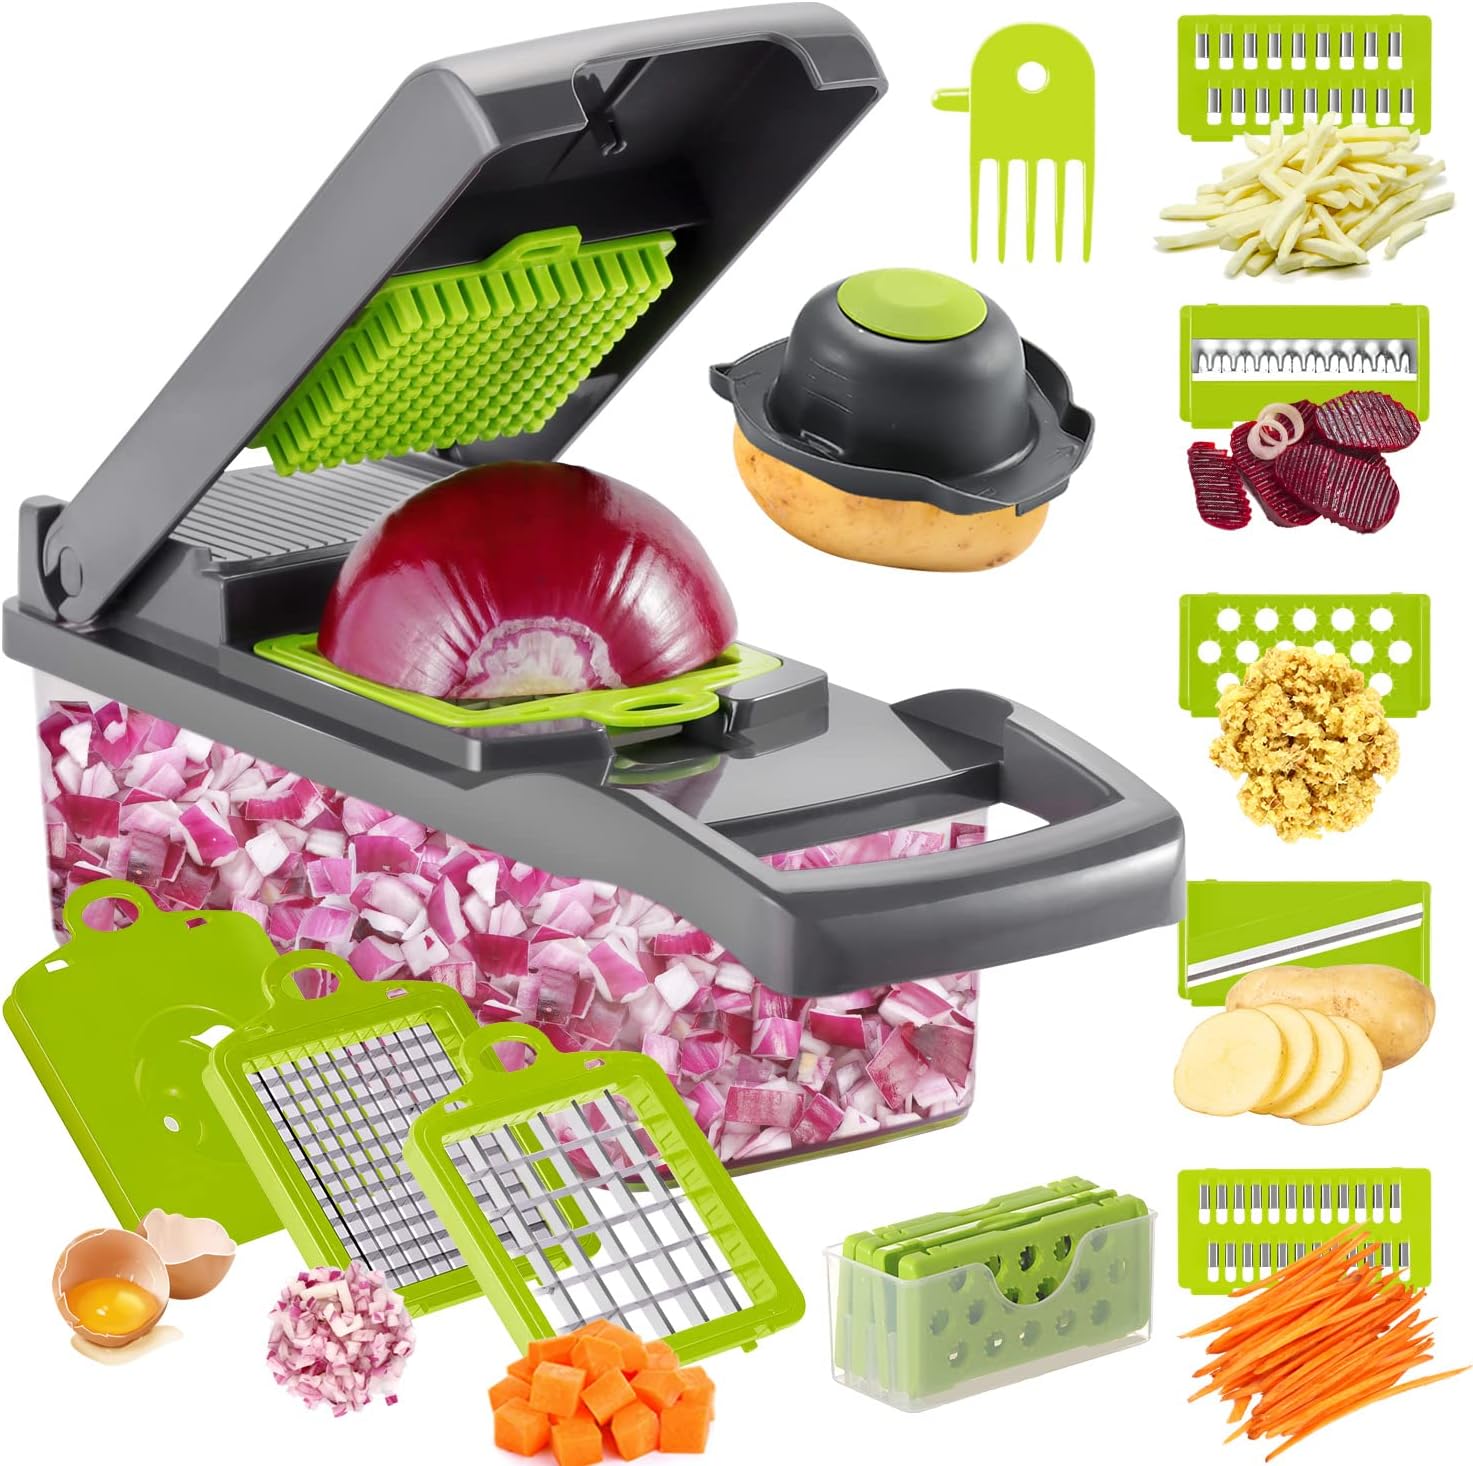 EOIBIS Vegetable Chopper, Pro Onion 13-in-1 Mandoline Slicer professional  food Chopper multifunctional and Slicer, Dicing Machine, Kitchen Gadgets